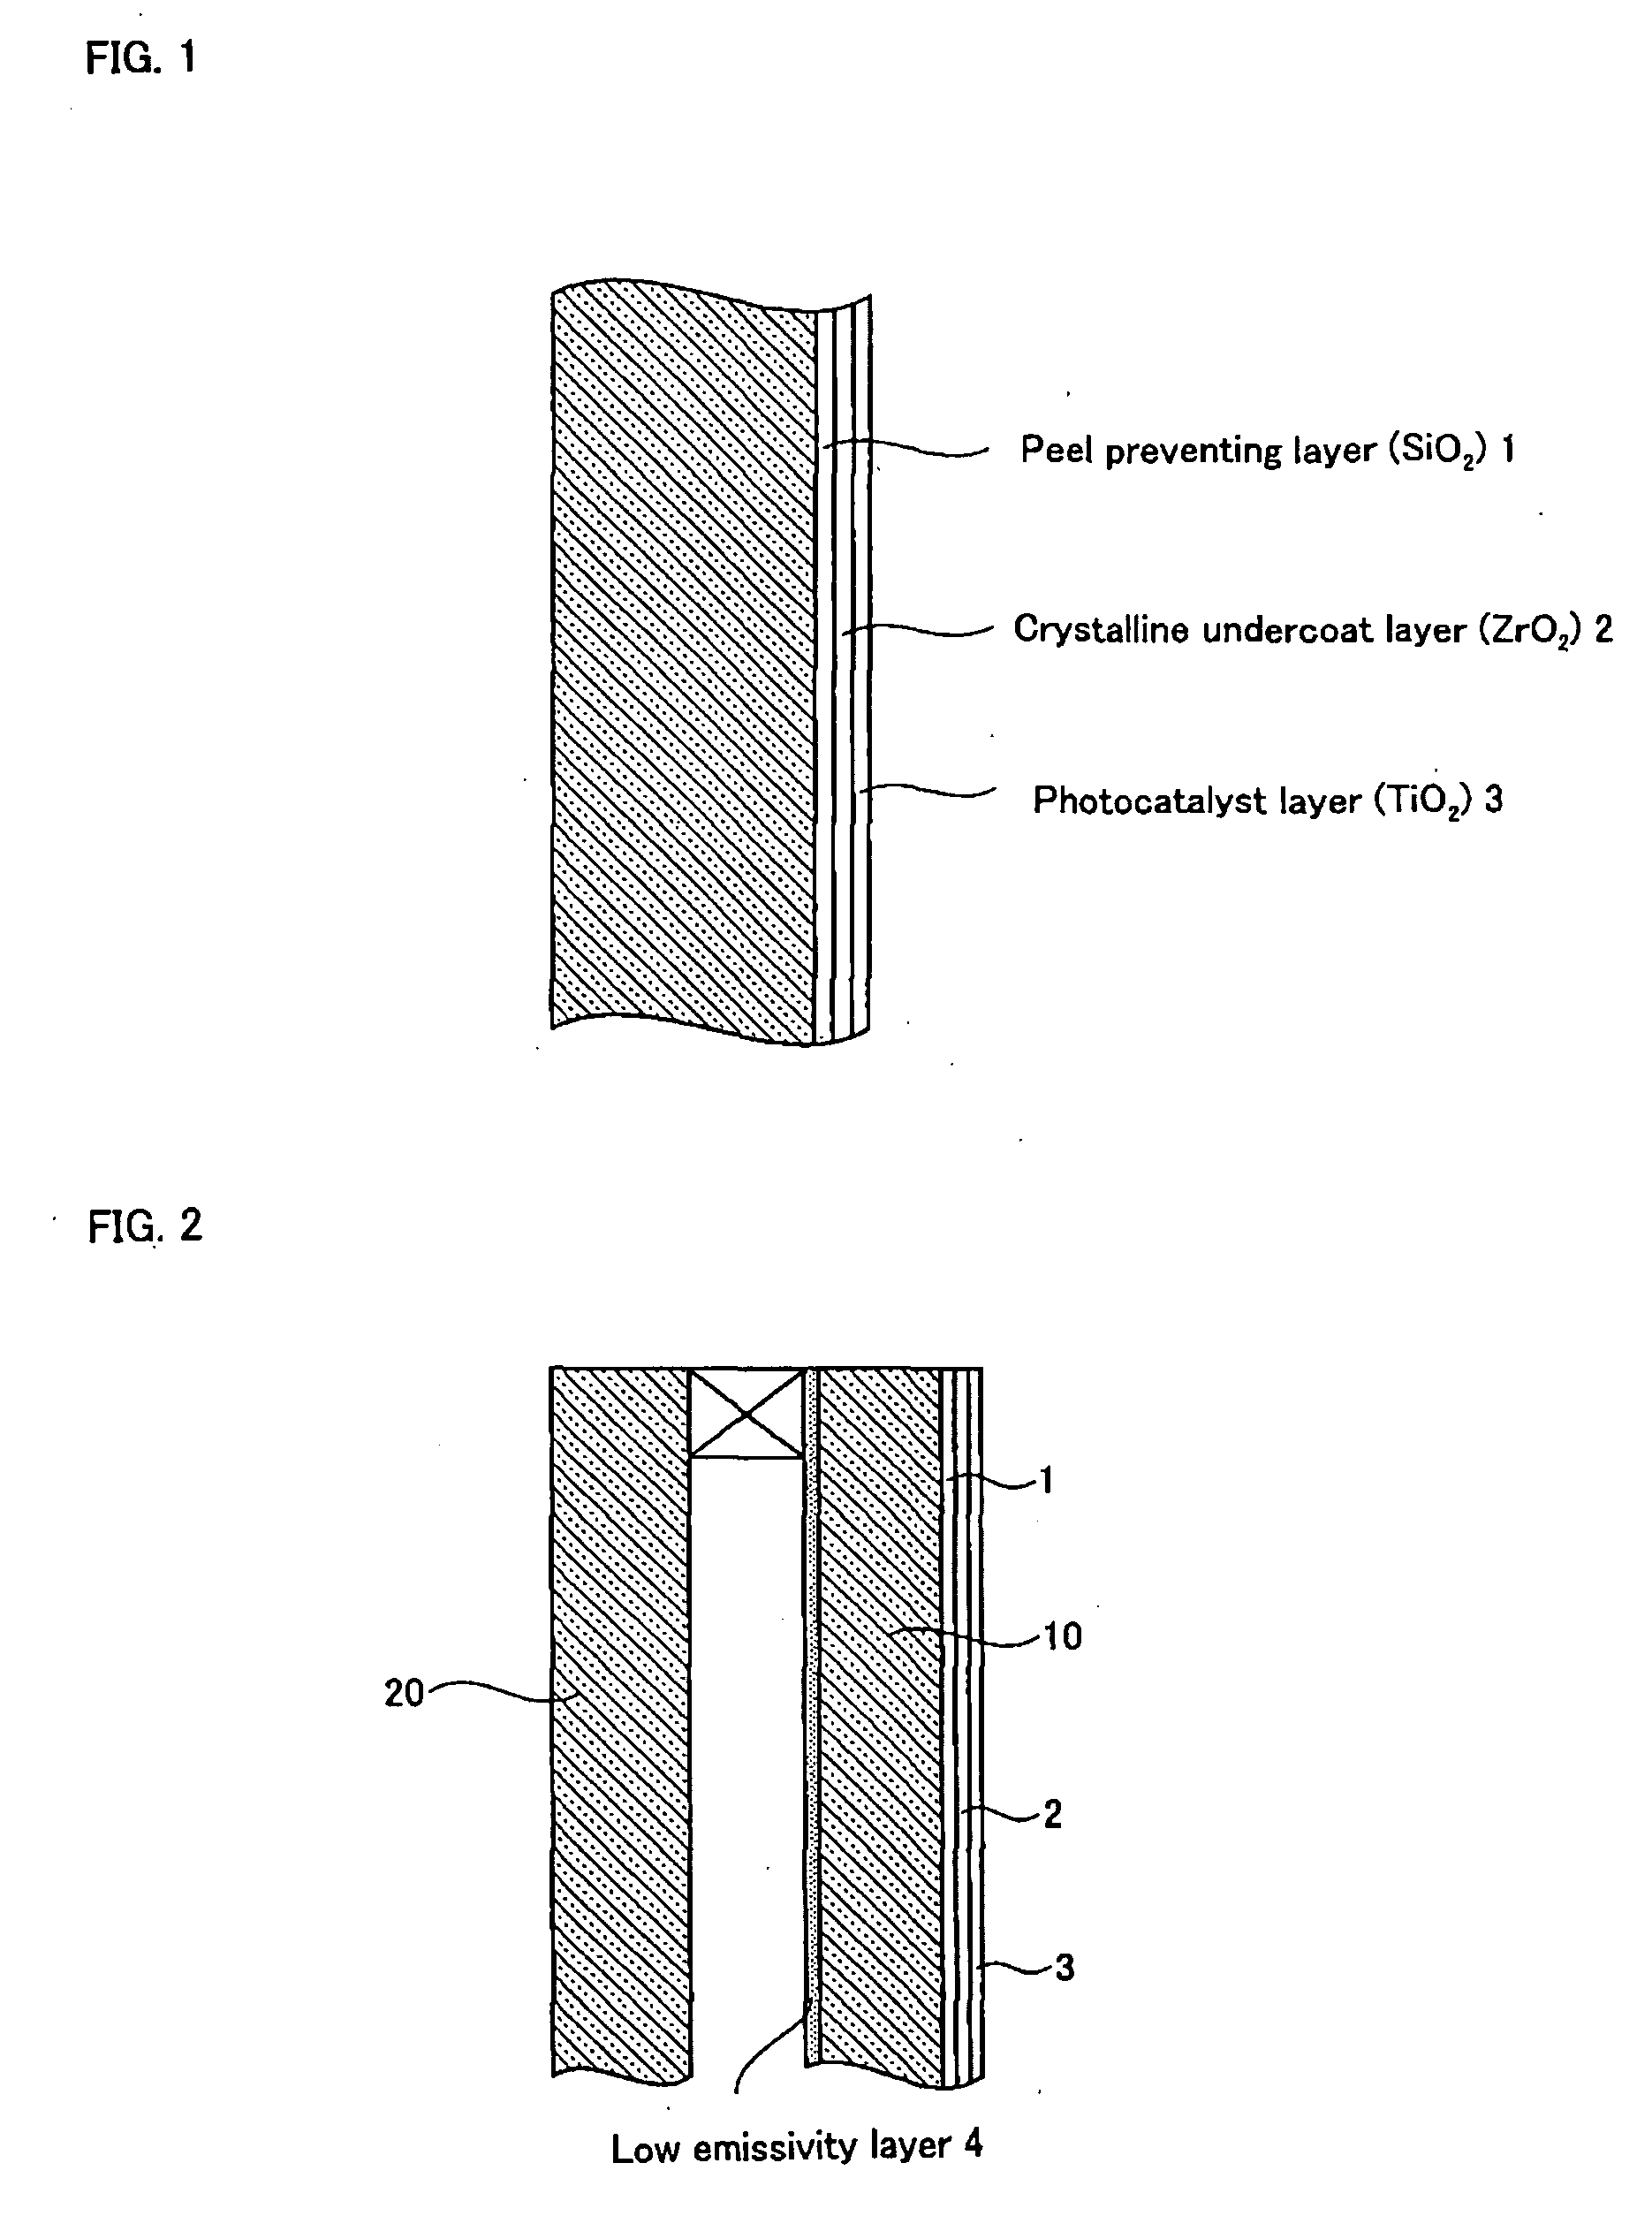 Member having photocatalytic activity and multilayered glass